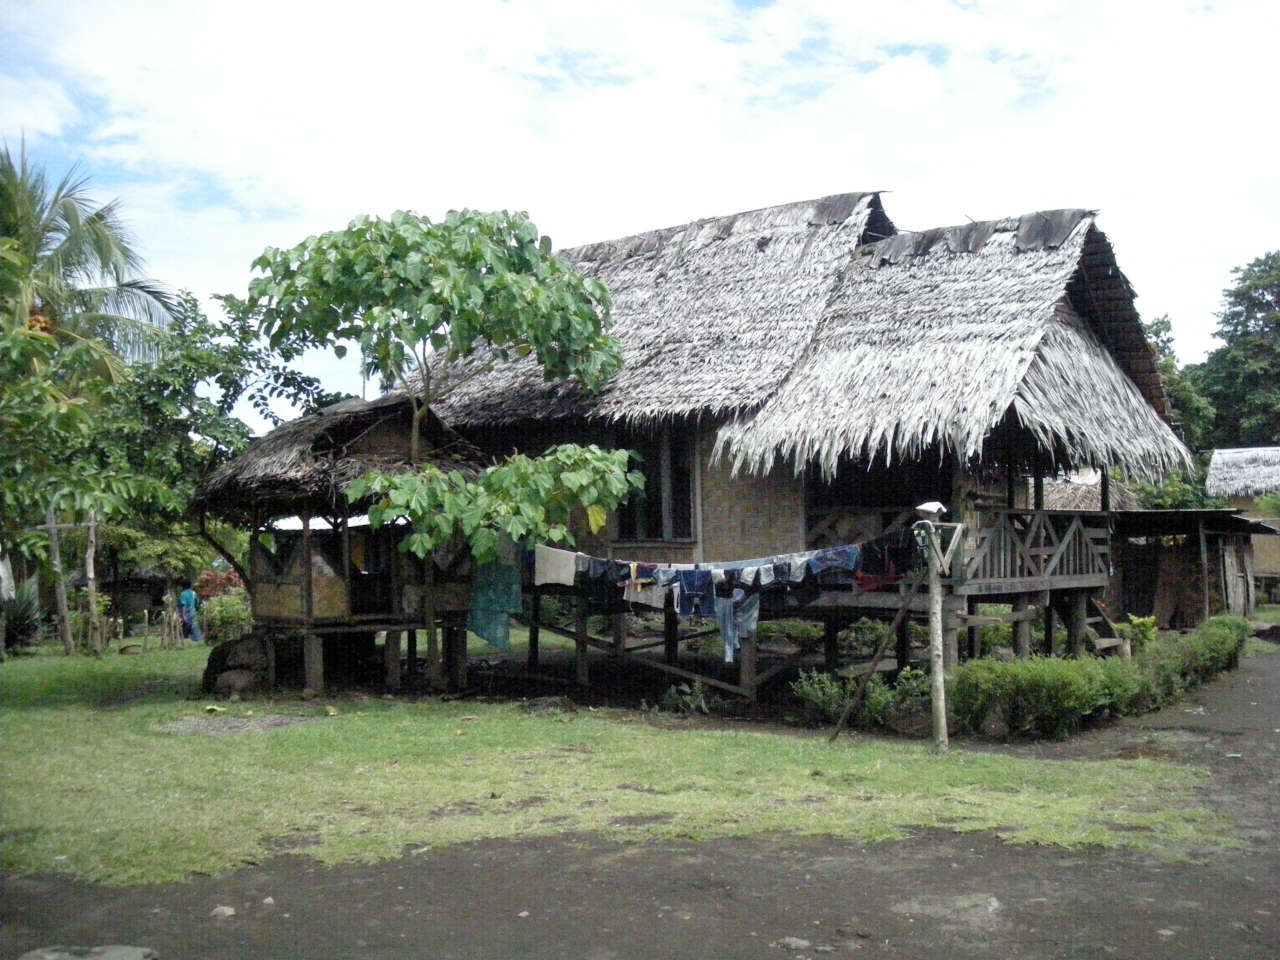 Wooden house with thatched roof